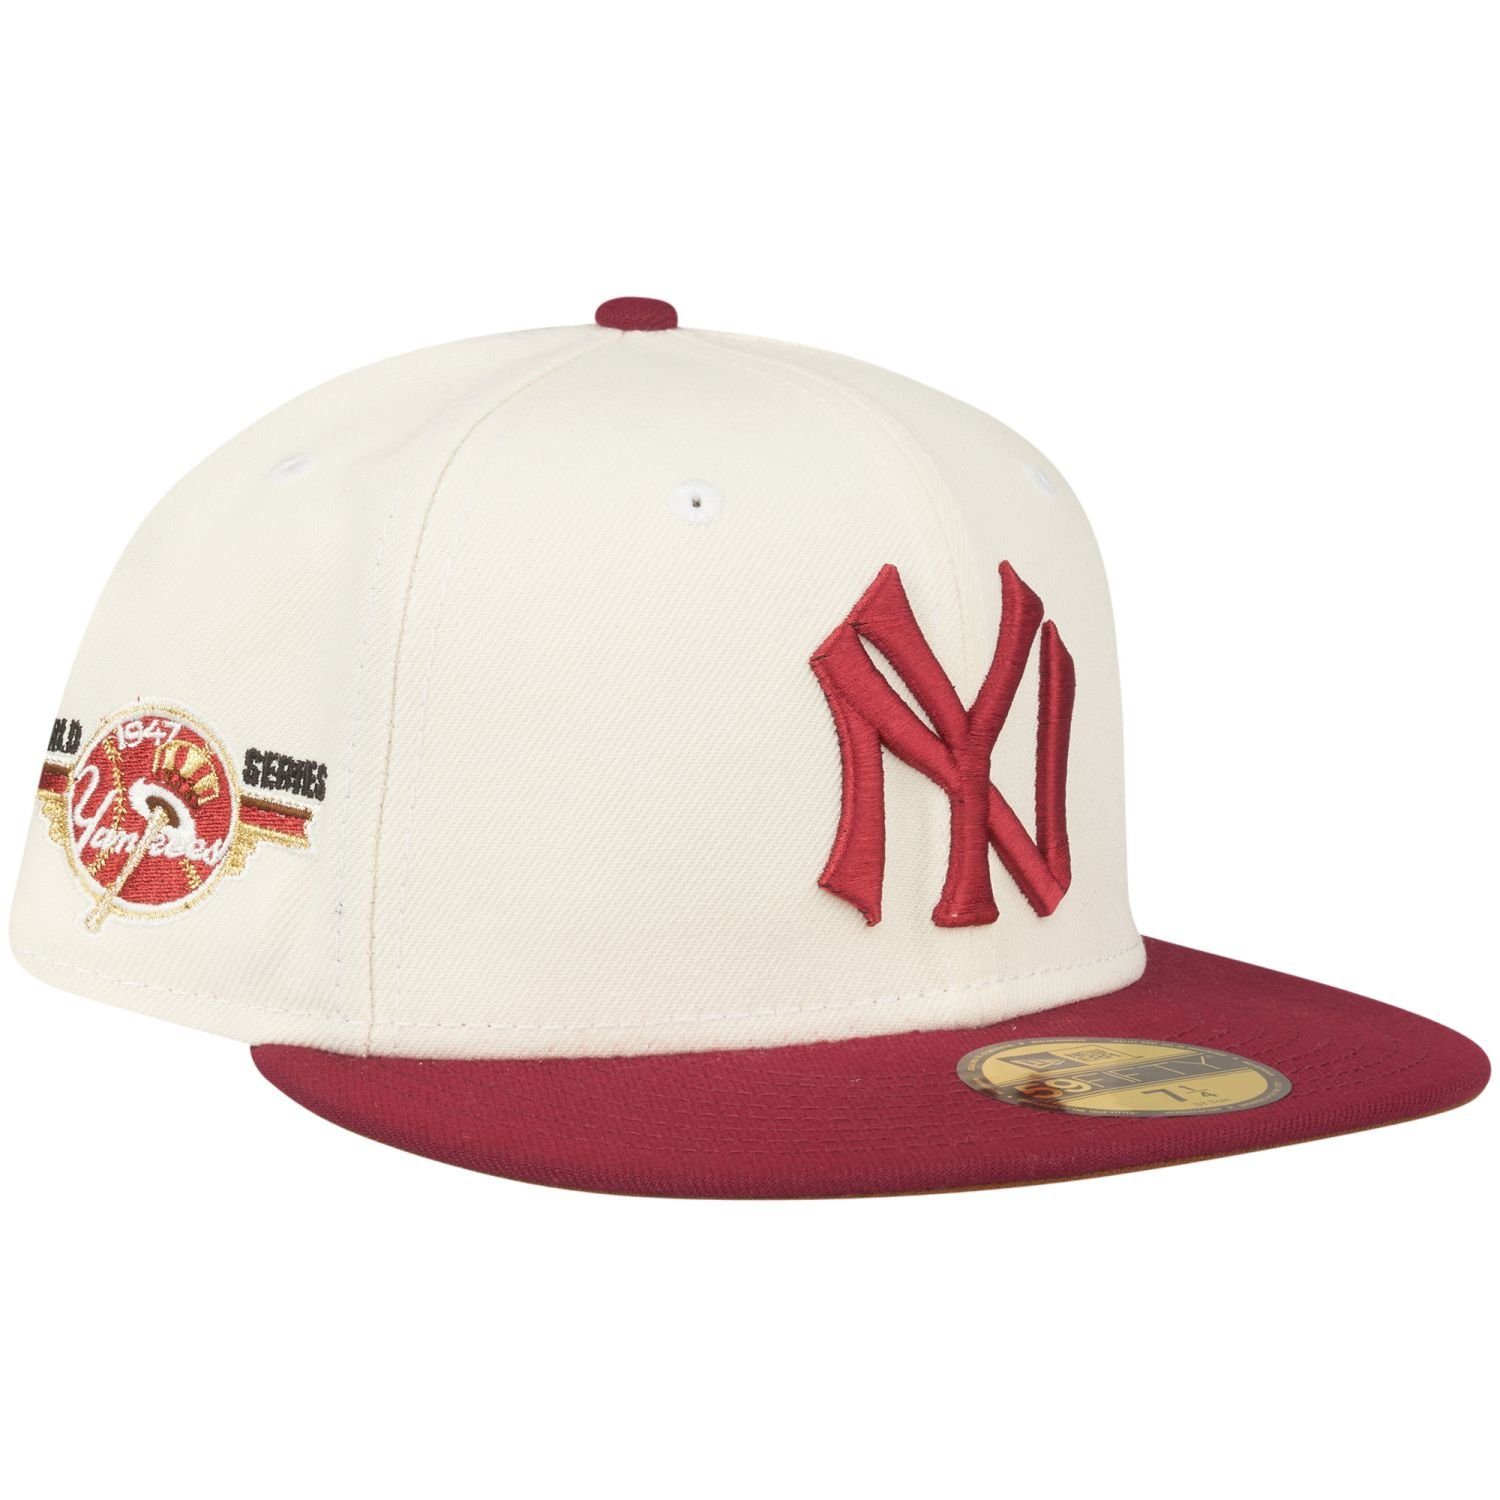 1947 New Fitted Cap Era 59Fifty New York COOPERSTOWN Yankees